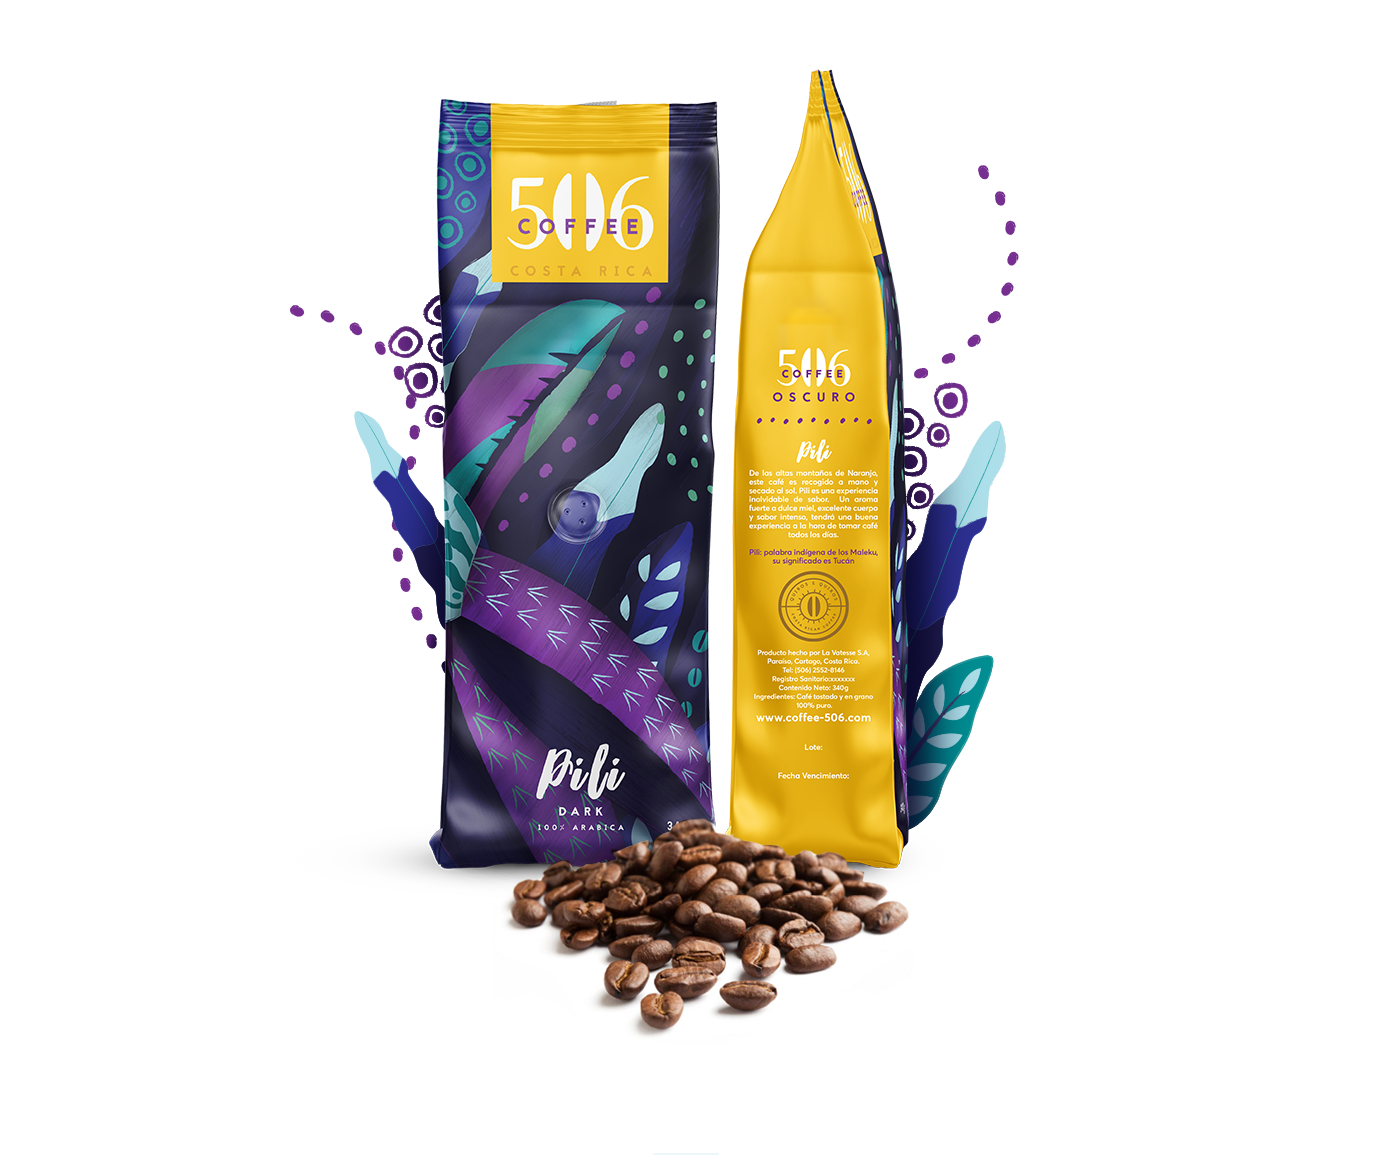 Branded Packaging Design for Vibrant Costa Rica Coffee Brand